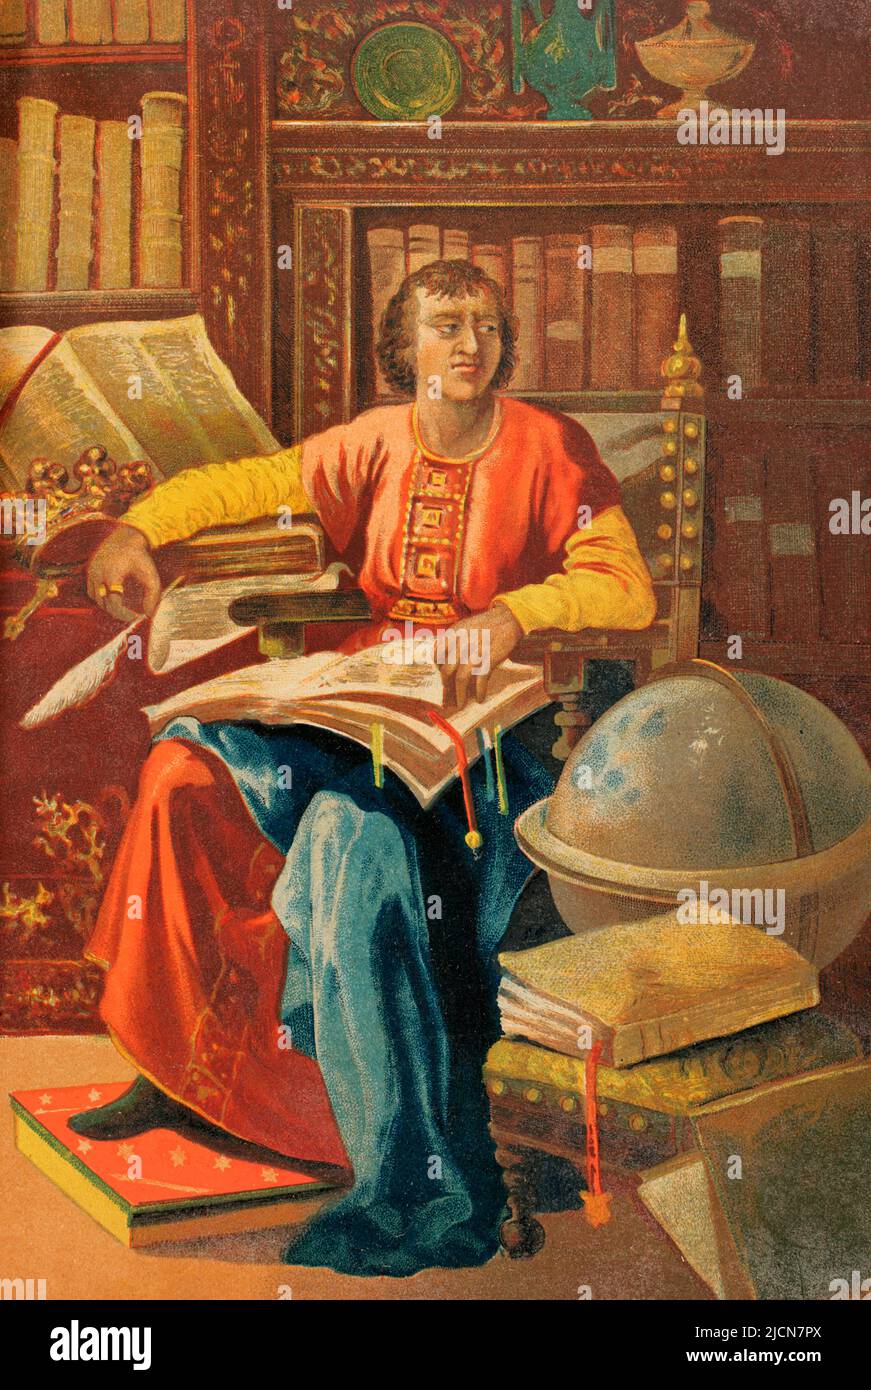 Alfonso X of Castile, called 'The Wise' (1221-1284). King of Castile and Leon. Portrait. Chromolithography. 'Historia Universal' (Universal History), by César Cantú. Volume VI. Published in Barcelona, 1885. Stock Photo